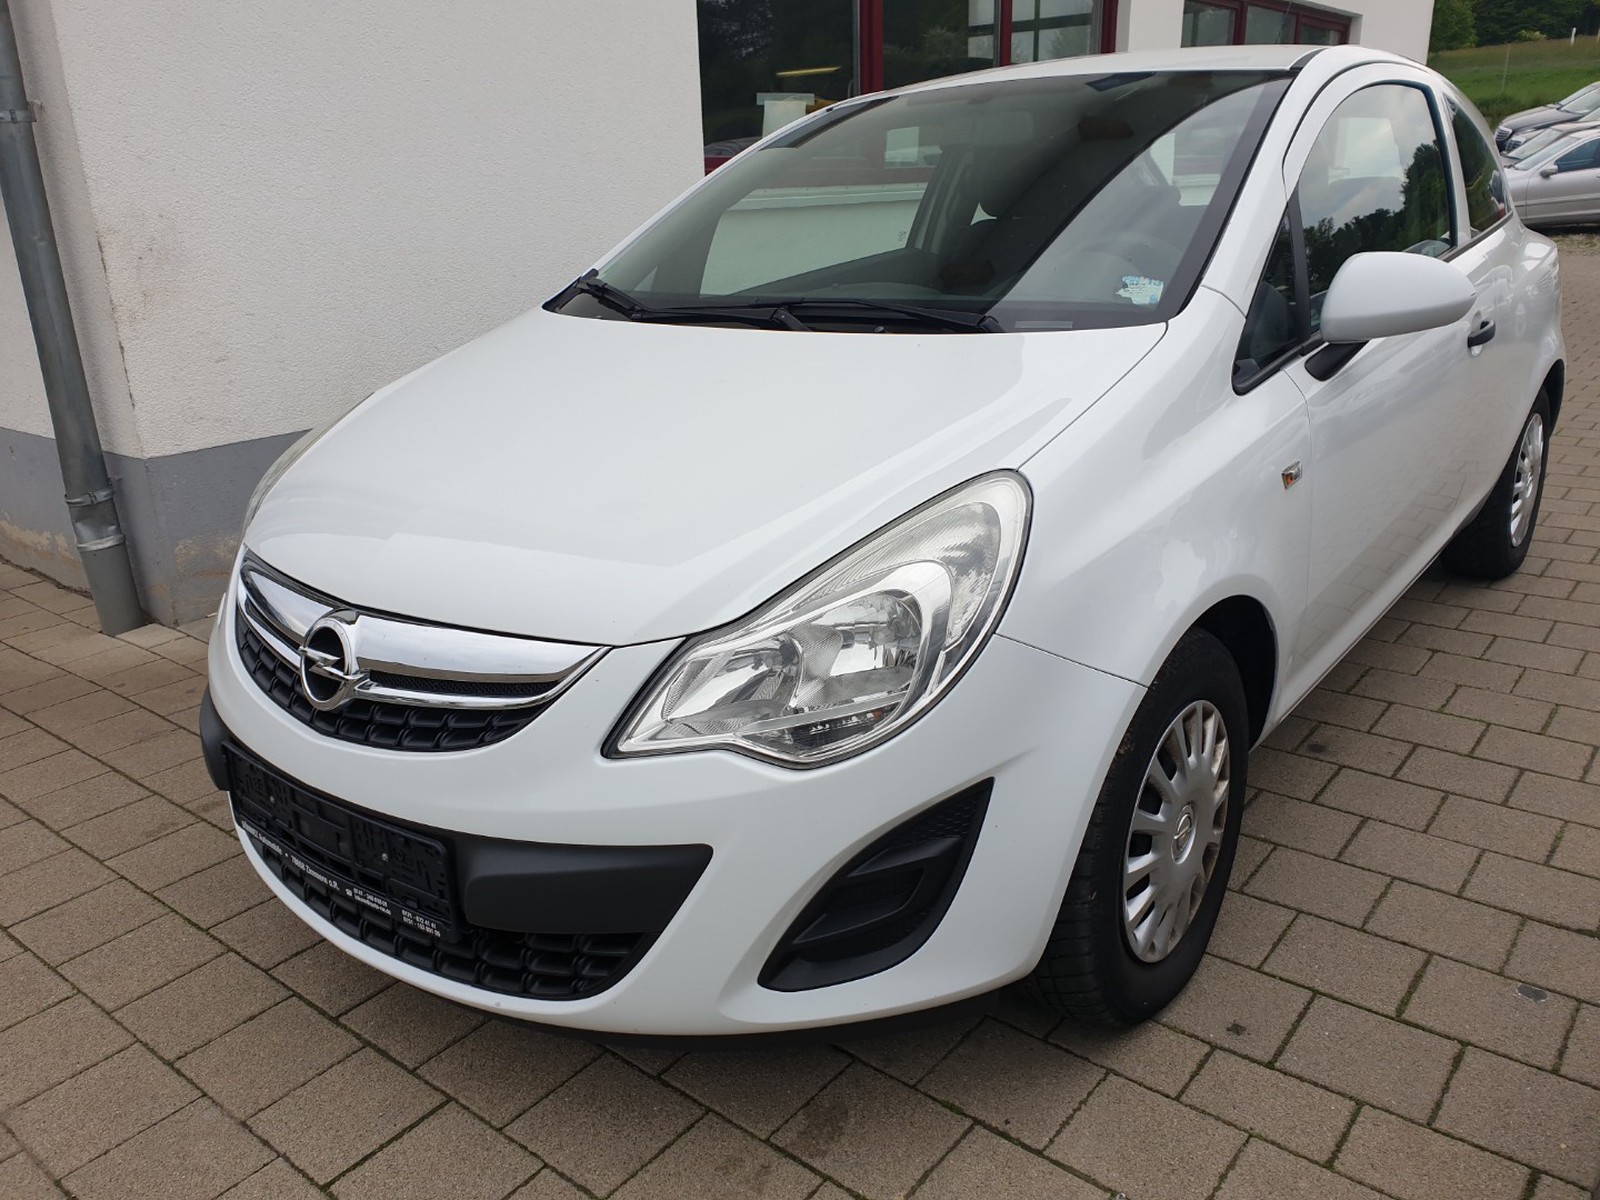 Opel Corsa D Selection used buy in Zimmern ob Rottweil - Int.Nr